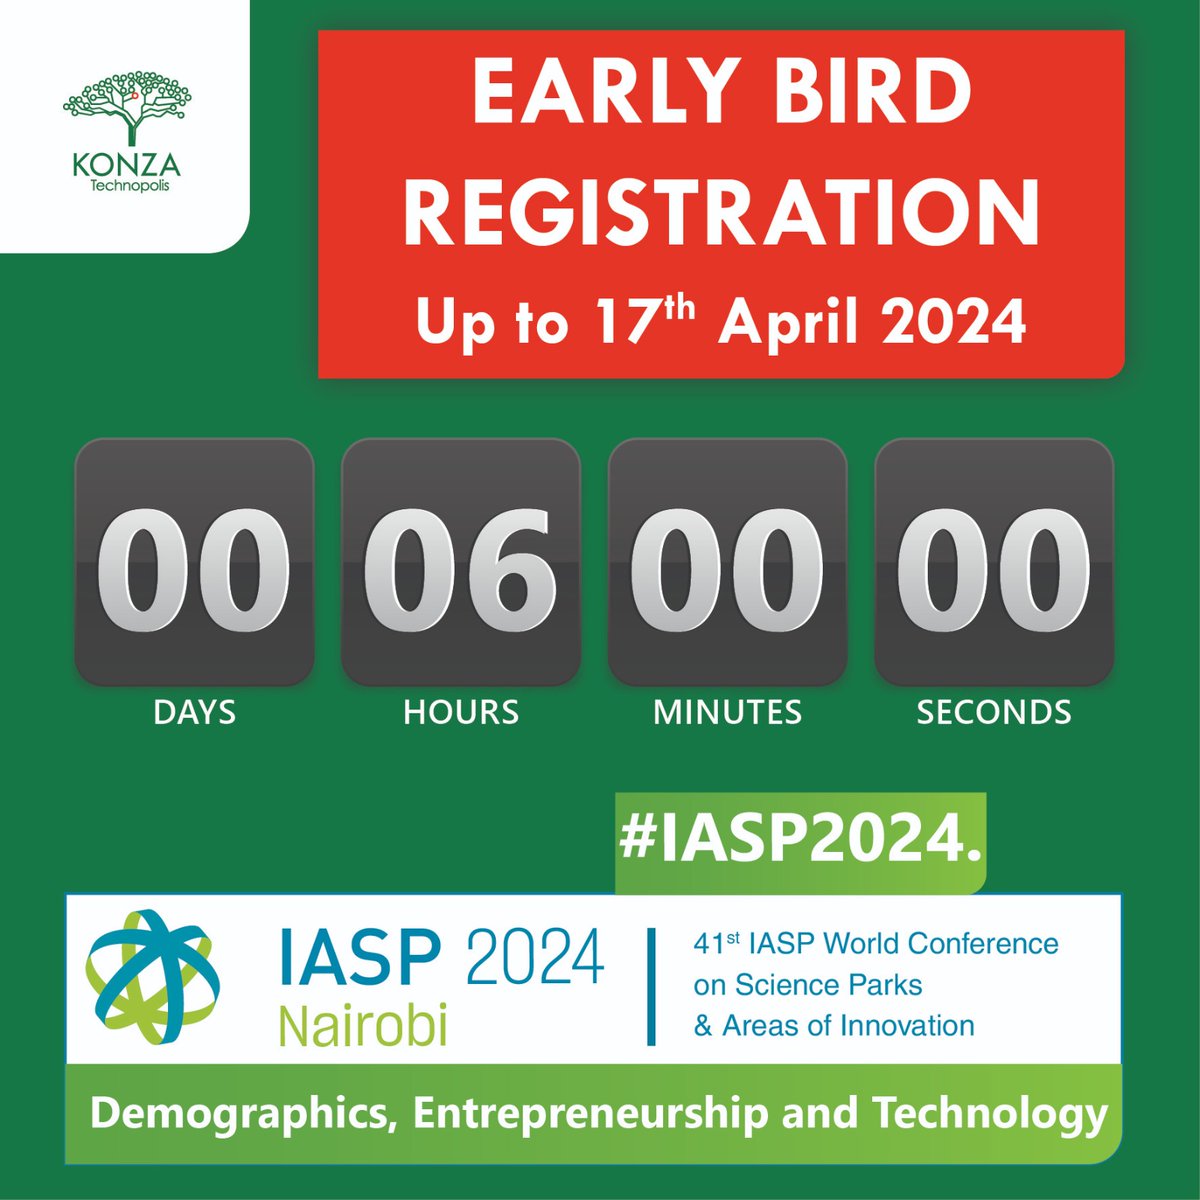 6 hours to go Hurry up! The deadline to get your early bird tickets for #IASP2024 is approaching quickly. Take advantage of this opportunity to contribute to the global dialogue on technology and entrepreneurship. #LetsGoToKenya #KonzaTechnopolis #SmartCity #SiliconSavannah